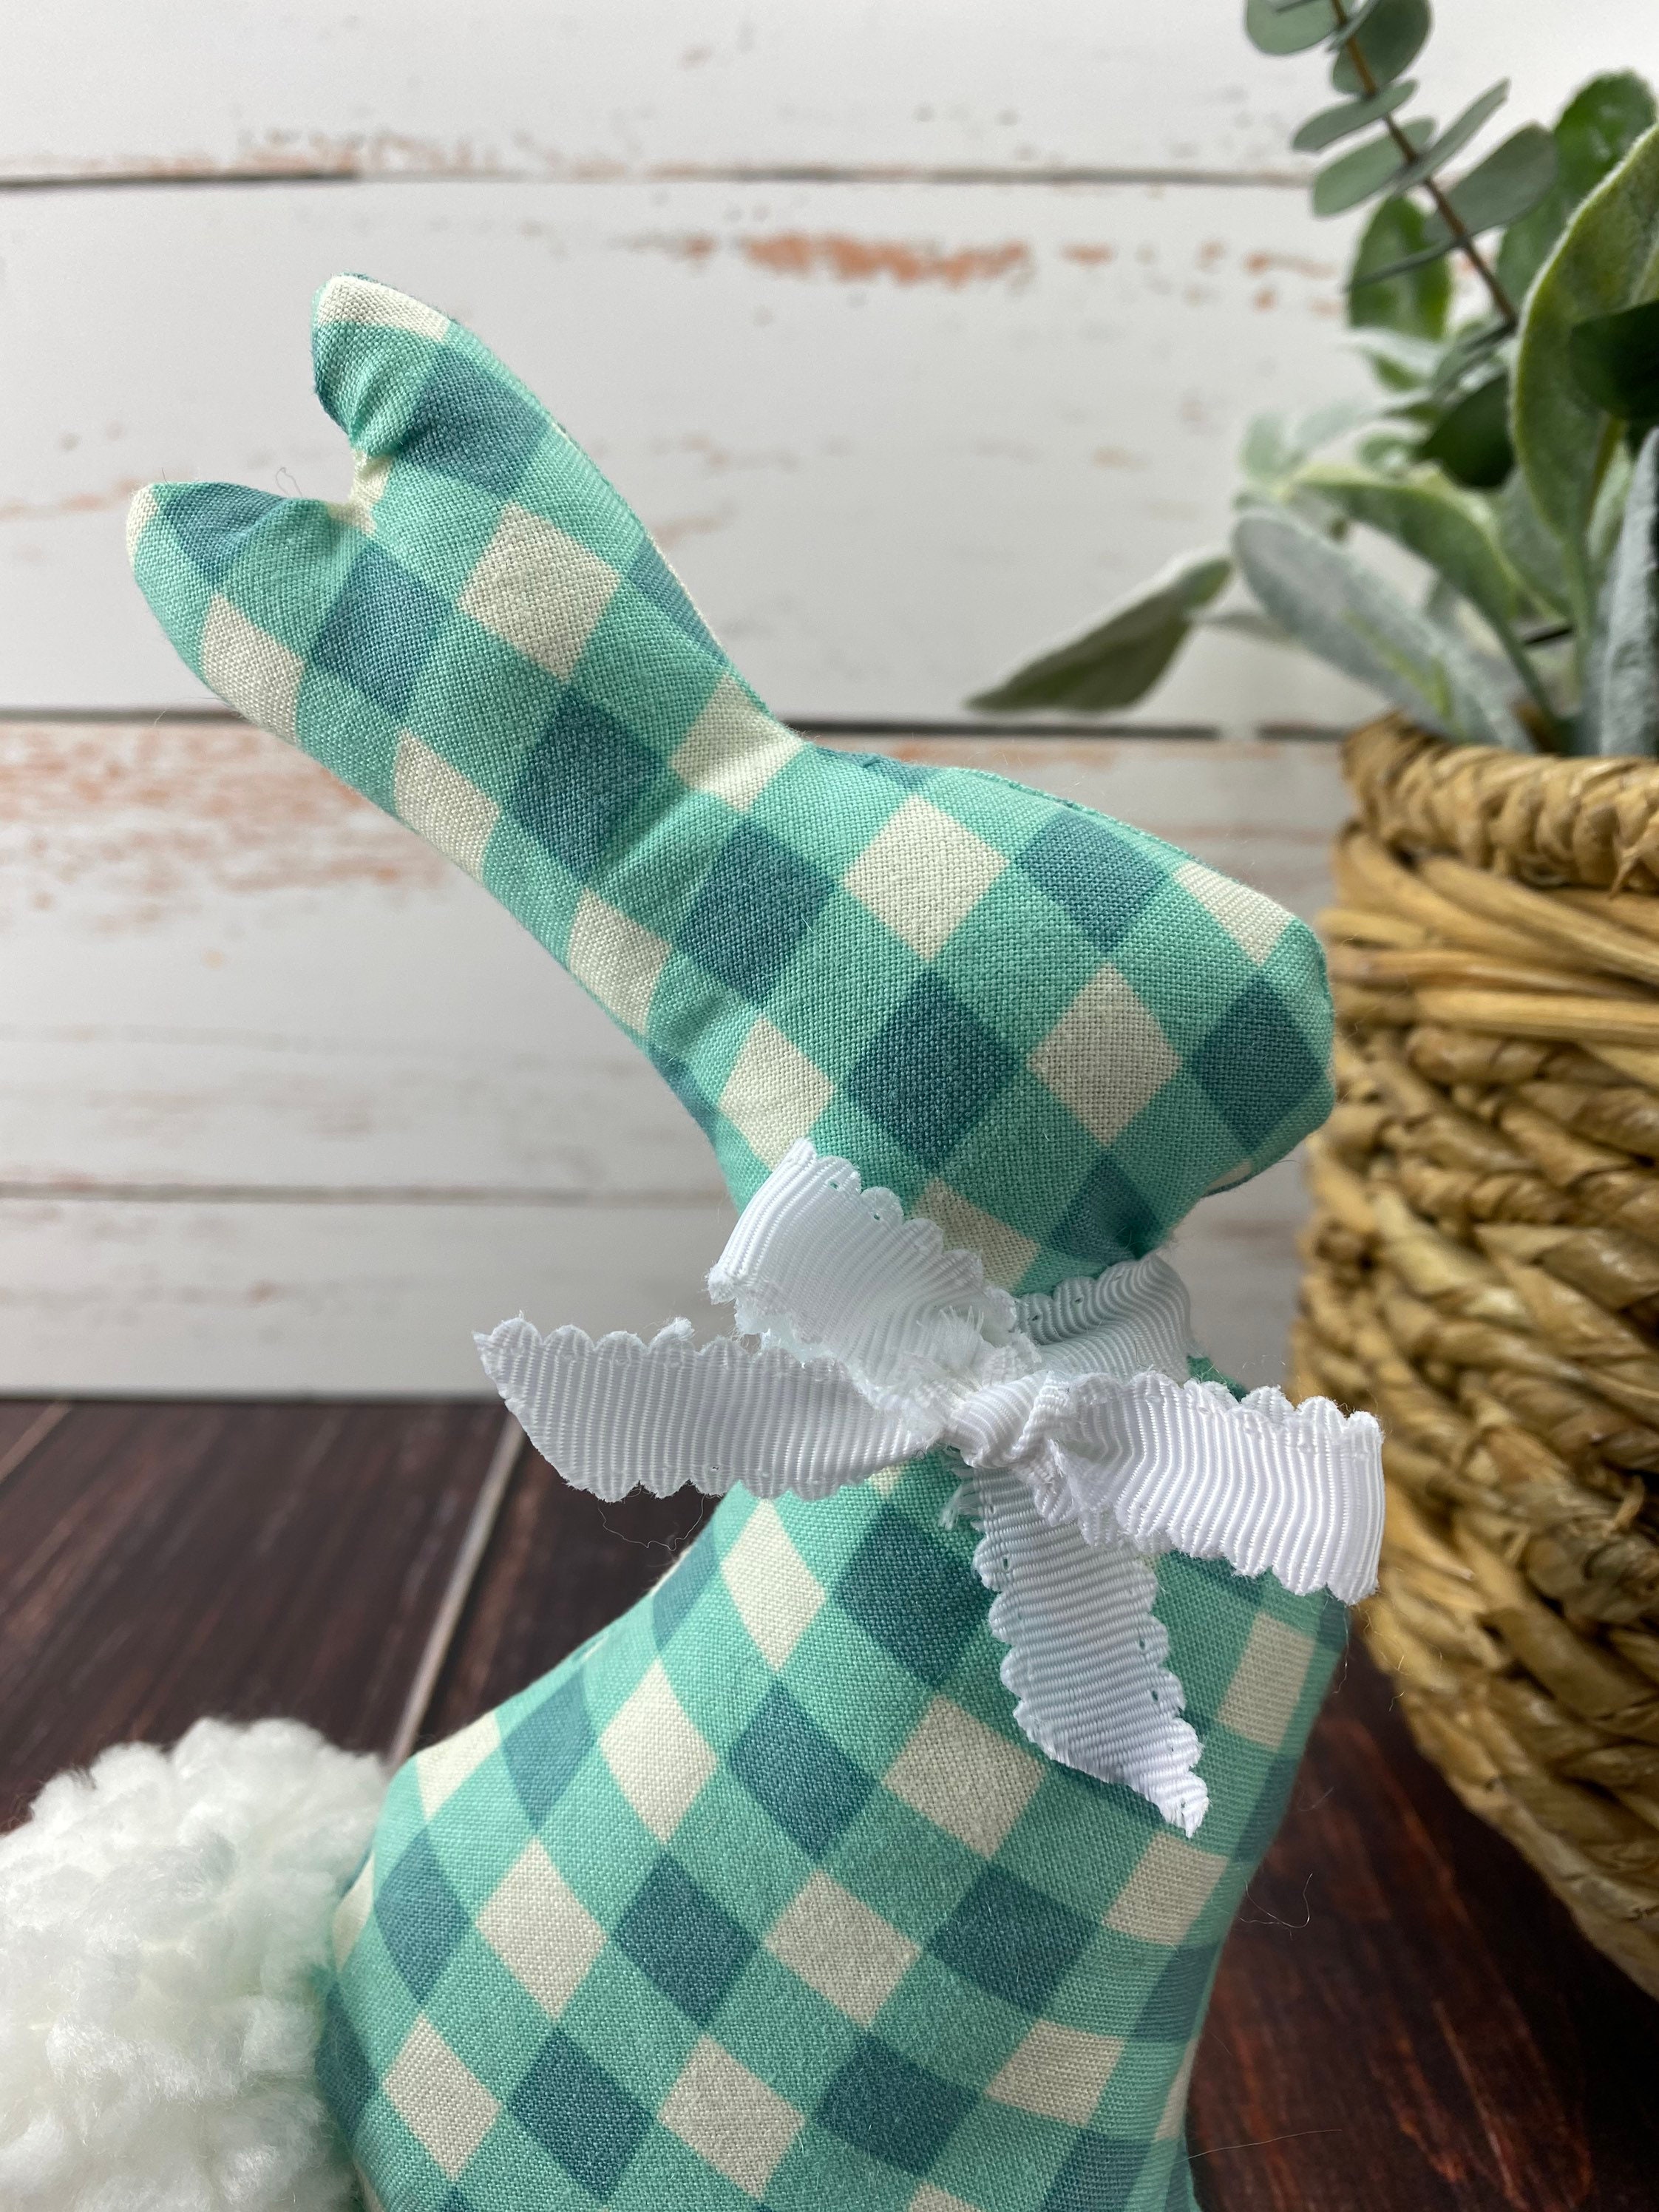 Blue White Fabric Bunny / Plaid Stuffed Easter Rabbit / Tiered | Etsy